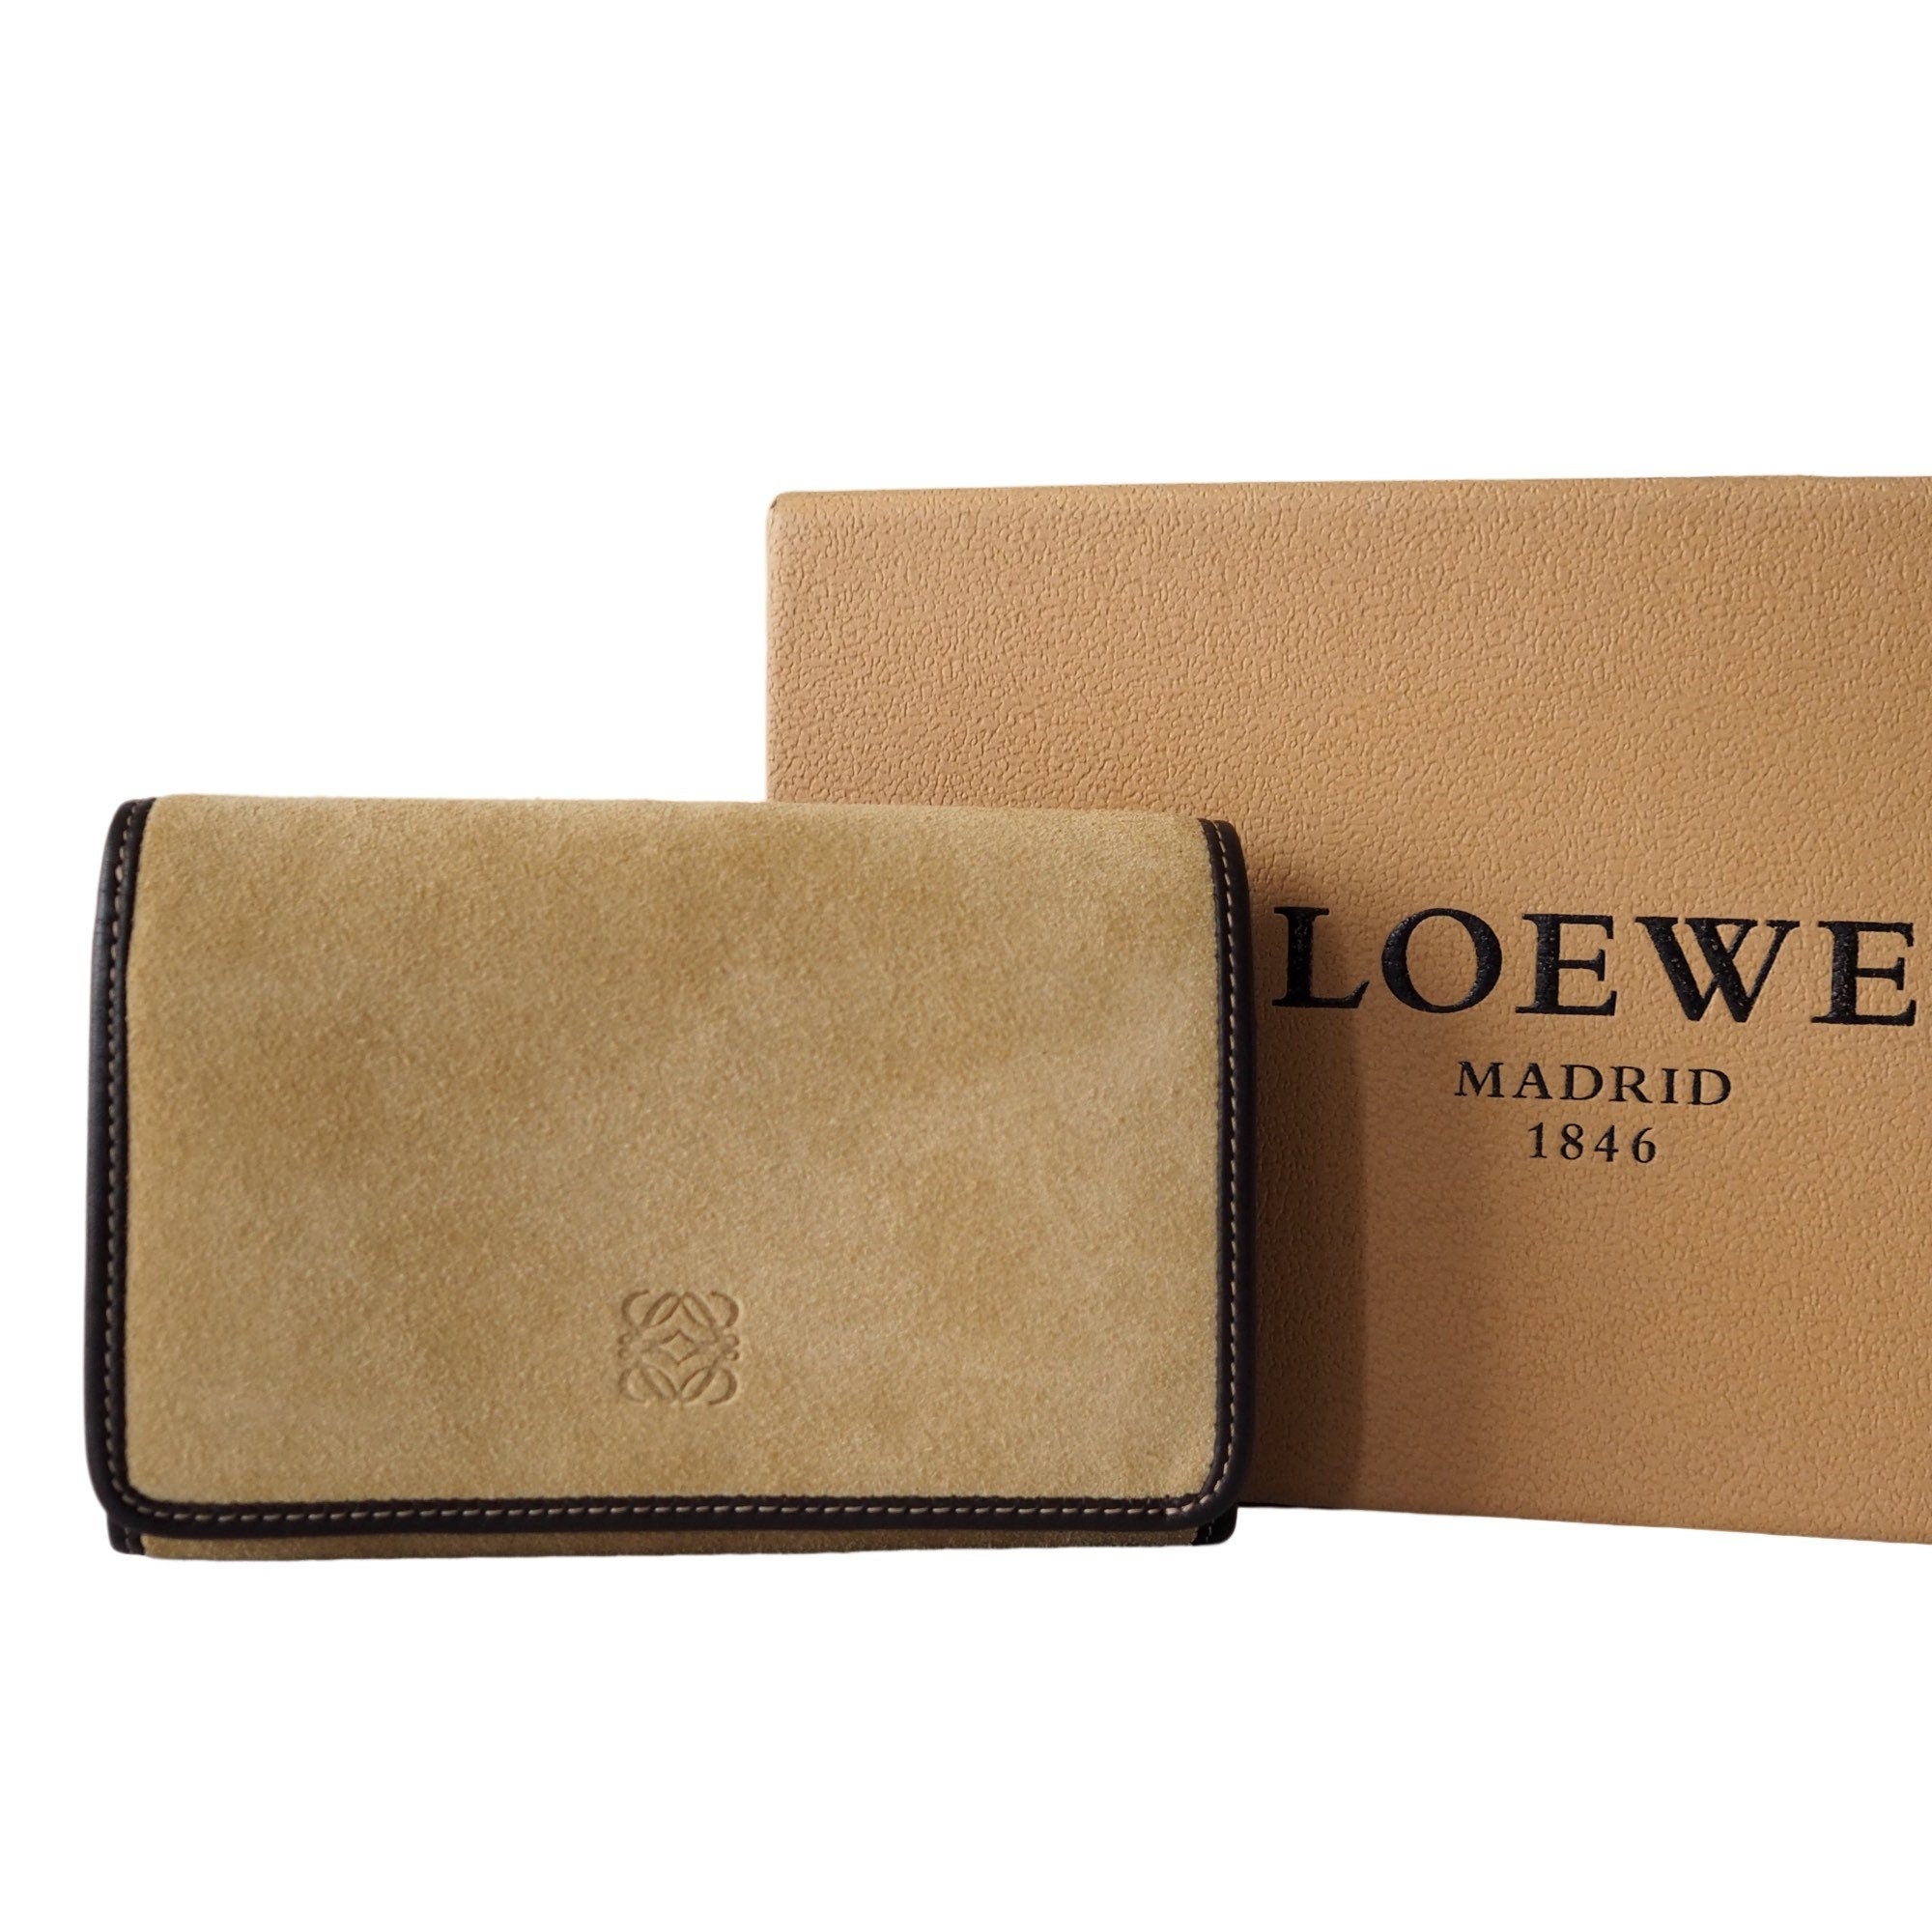 LOEWE Anagram Compact Wallet Suede Leather Beige Brown Authentic